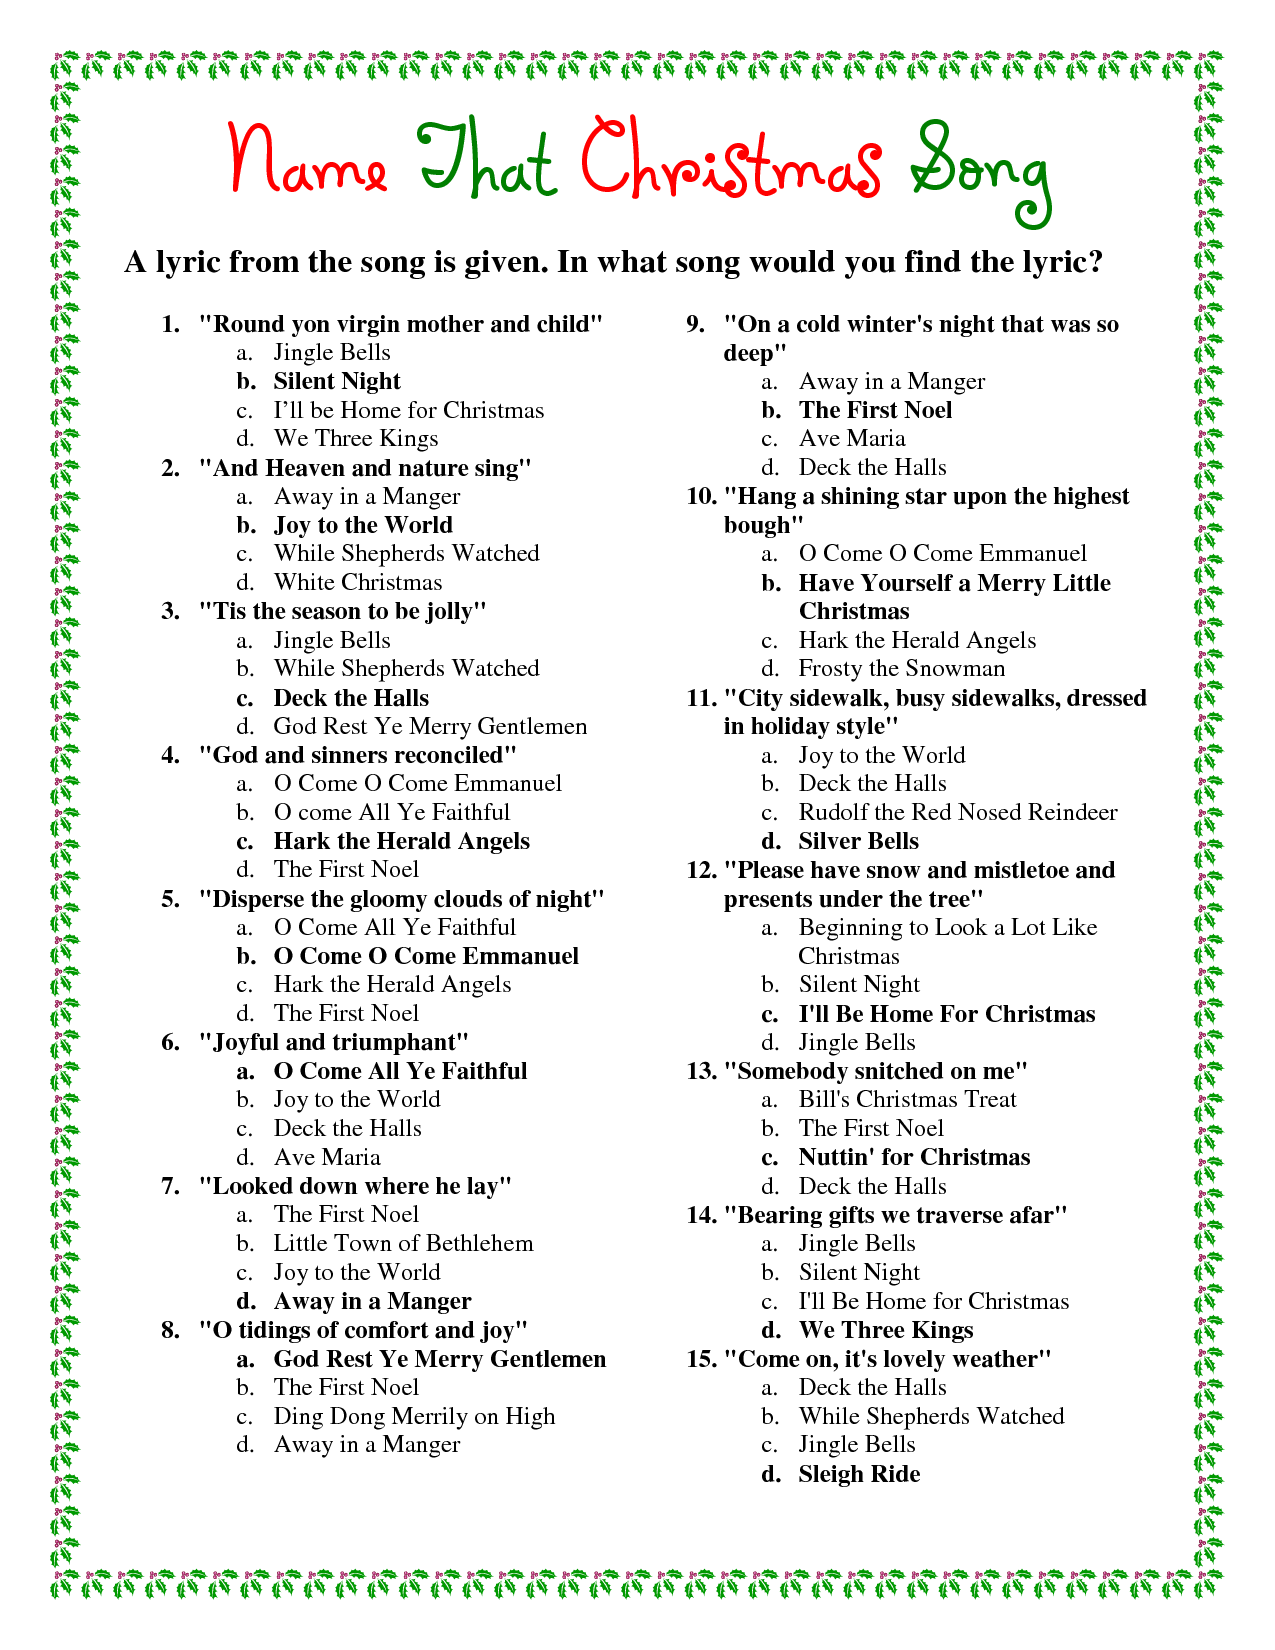 Christmas Music Trivia Questions And Answers